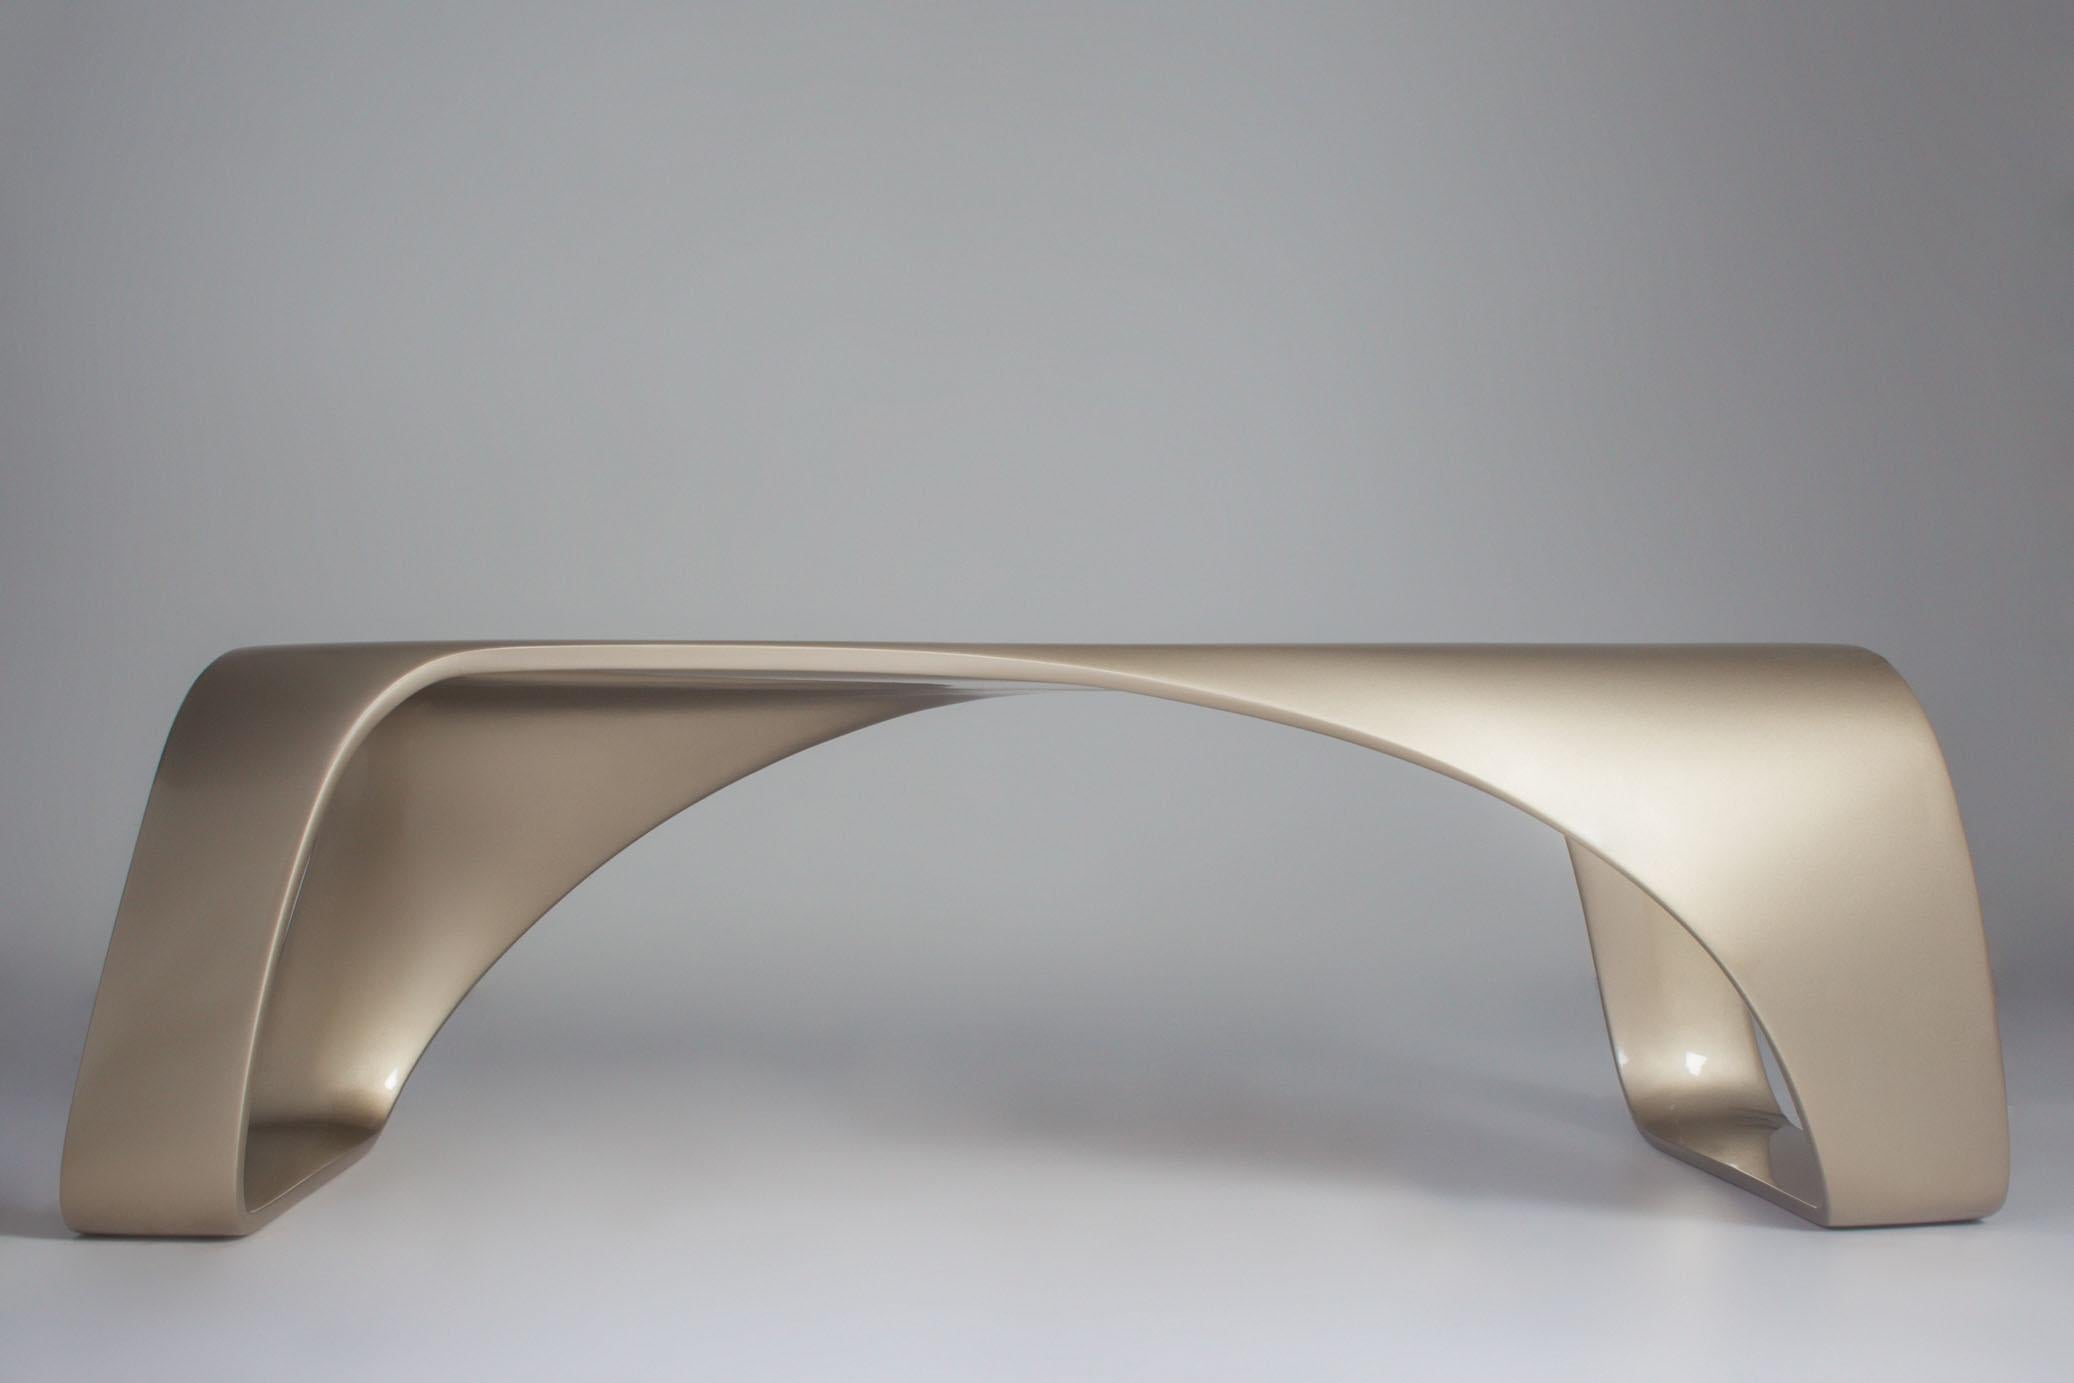 The O bench / table presents a perfectly seamless and smooth surface. Its beauty lies in its fluid design where borders harmoniously converge to create elegant curves and a continuous form. Simple yet intriguing, the O table is gracefully